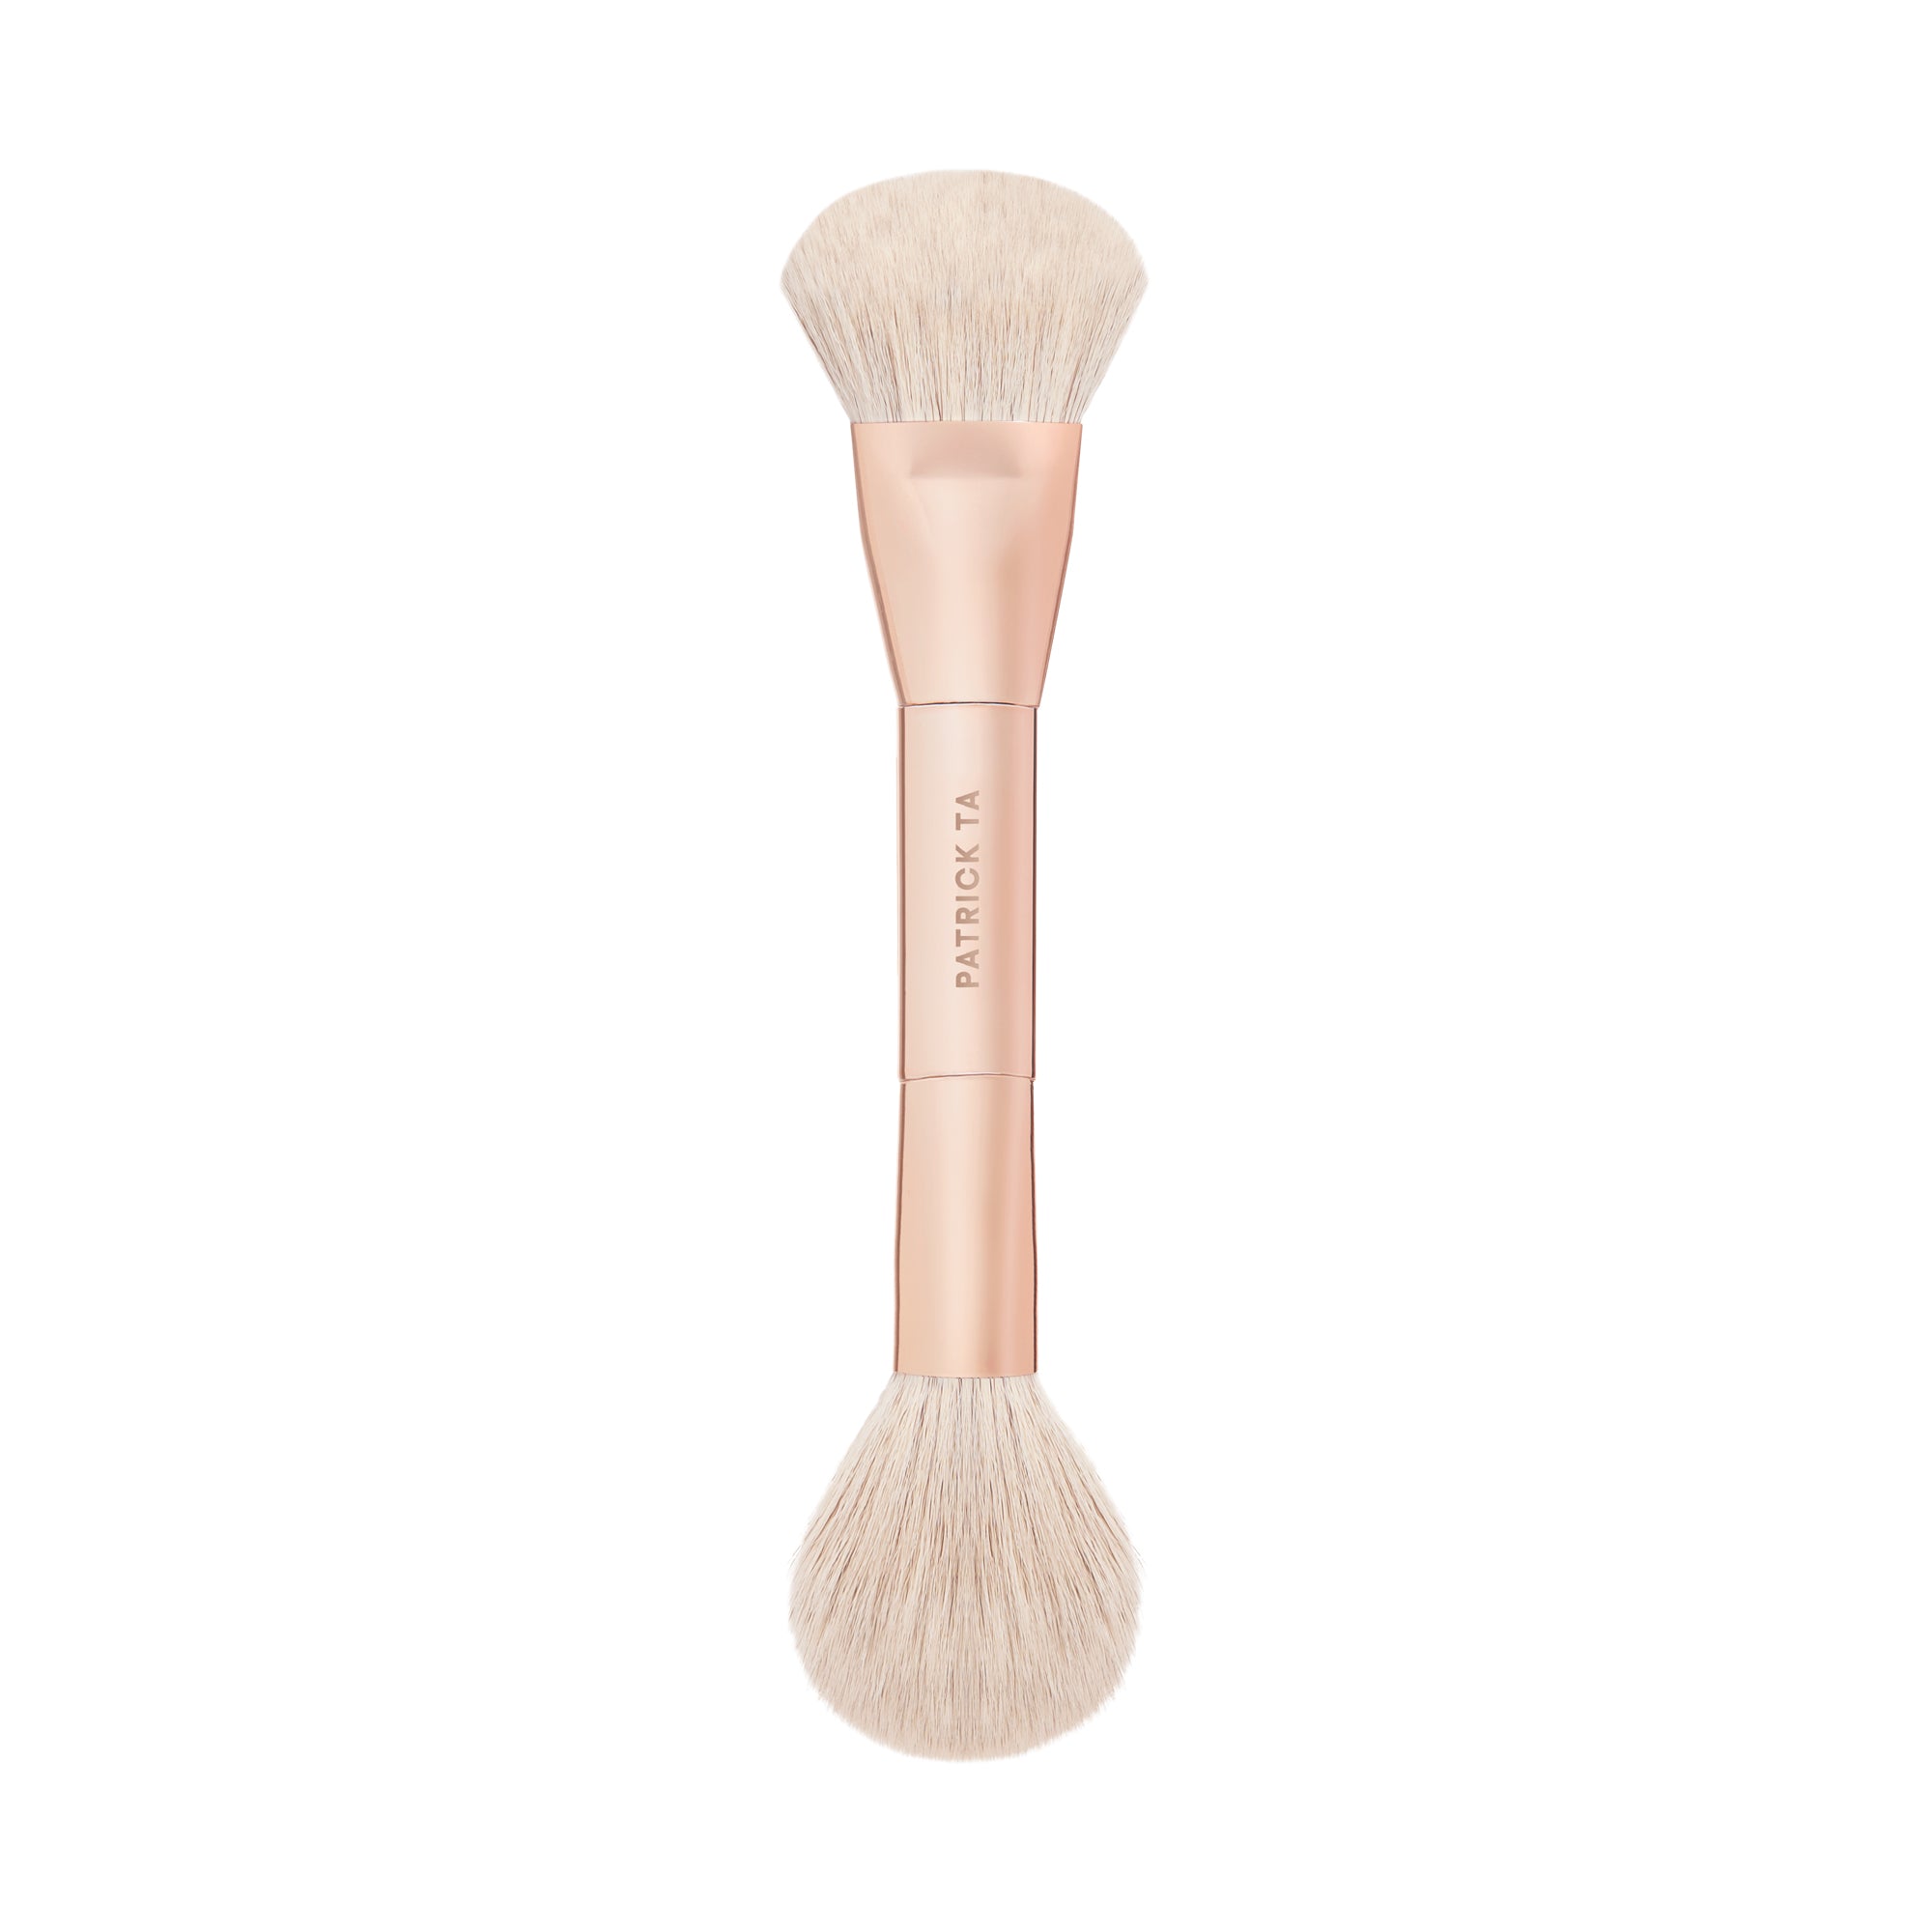 Katelia Beauty Nose Contour Makeup Brush for Sculpting and Defining Nose  Contour, Precision Duo Contour Brush, Innovative and Unique Dual-Ended  Brush